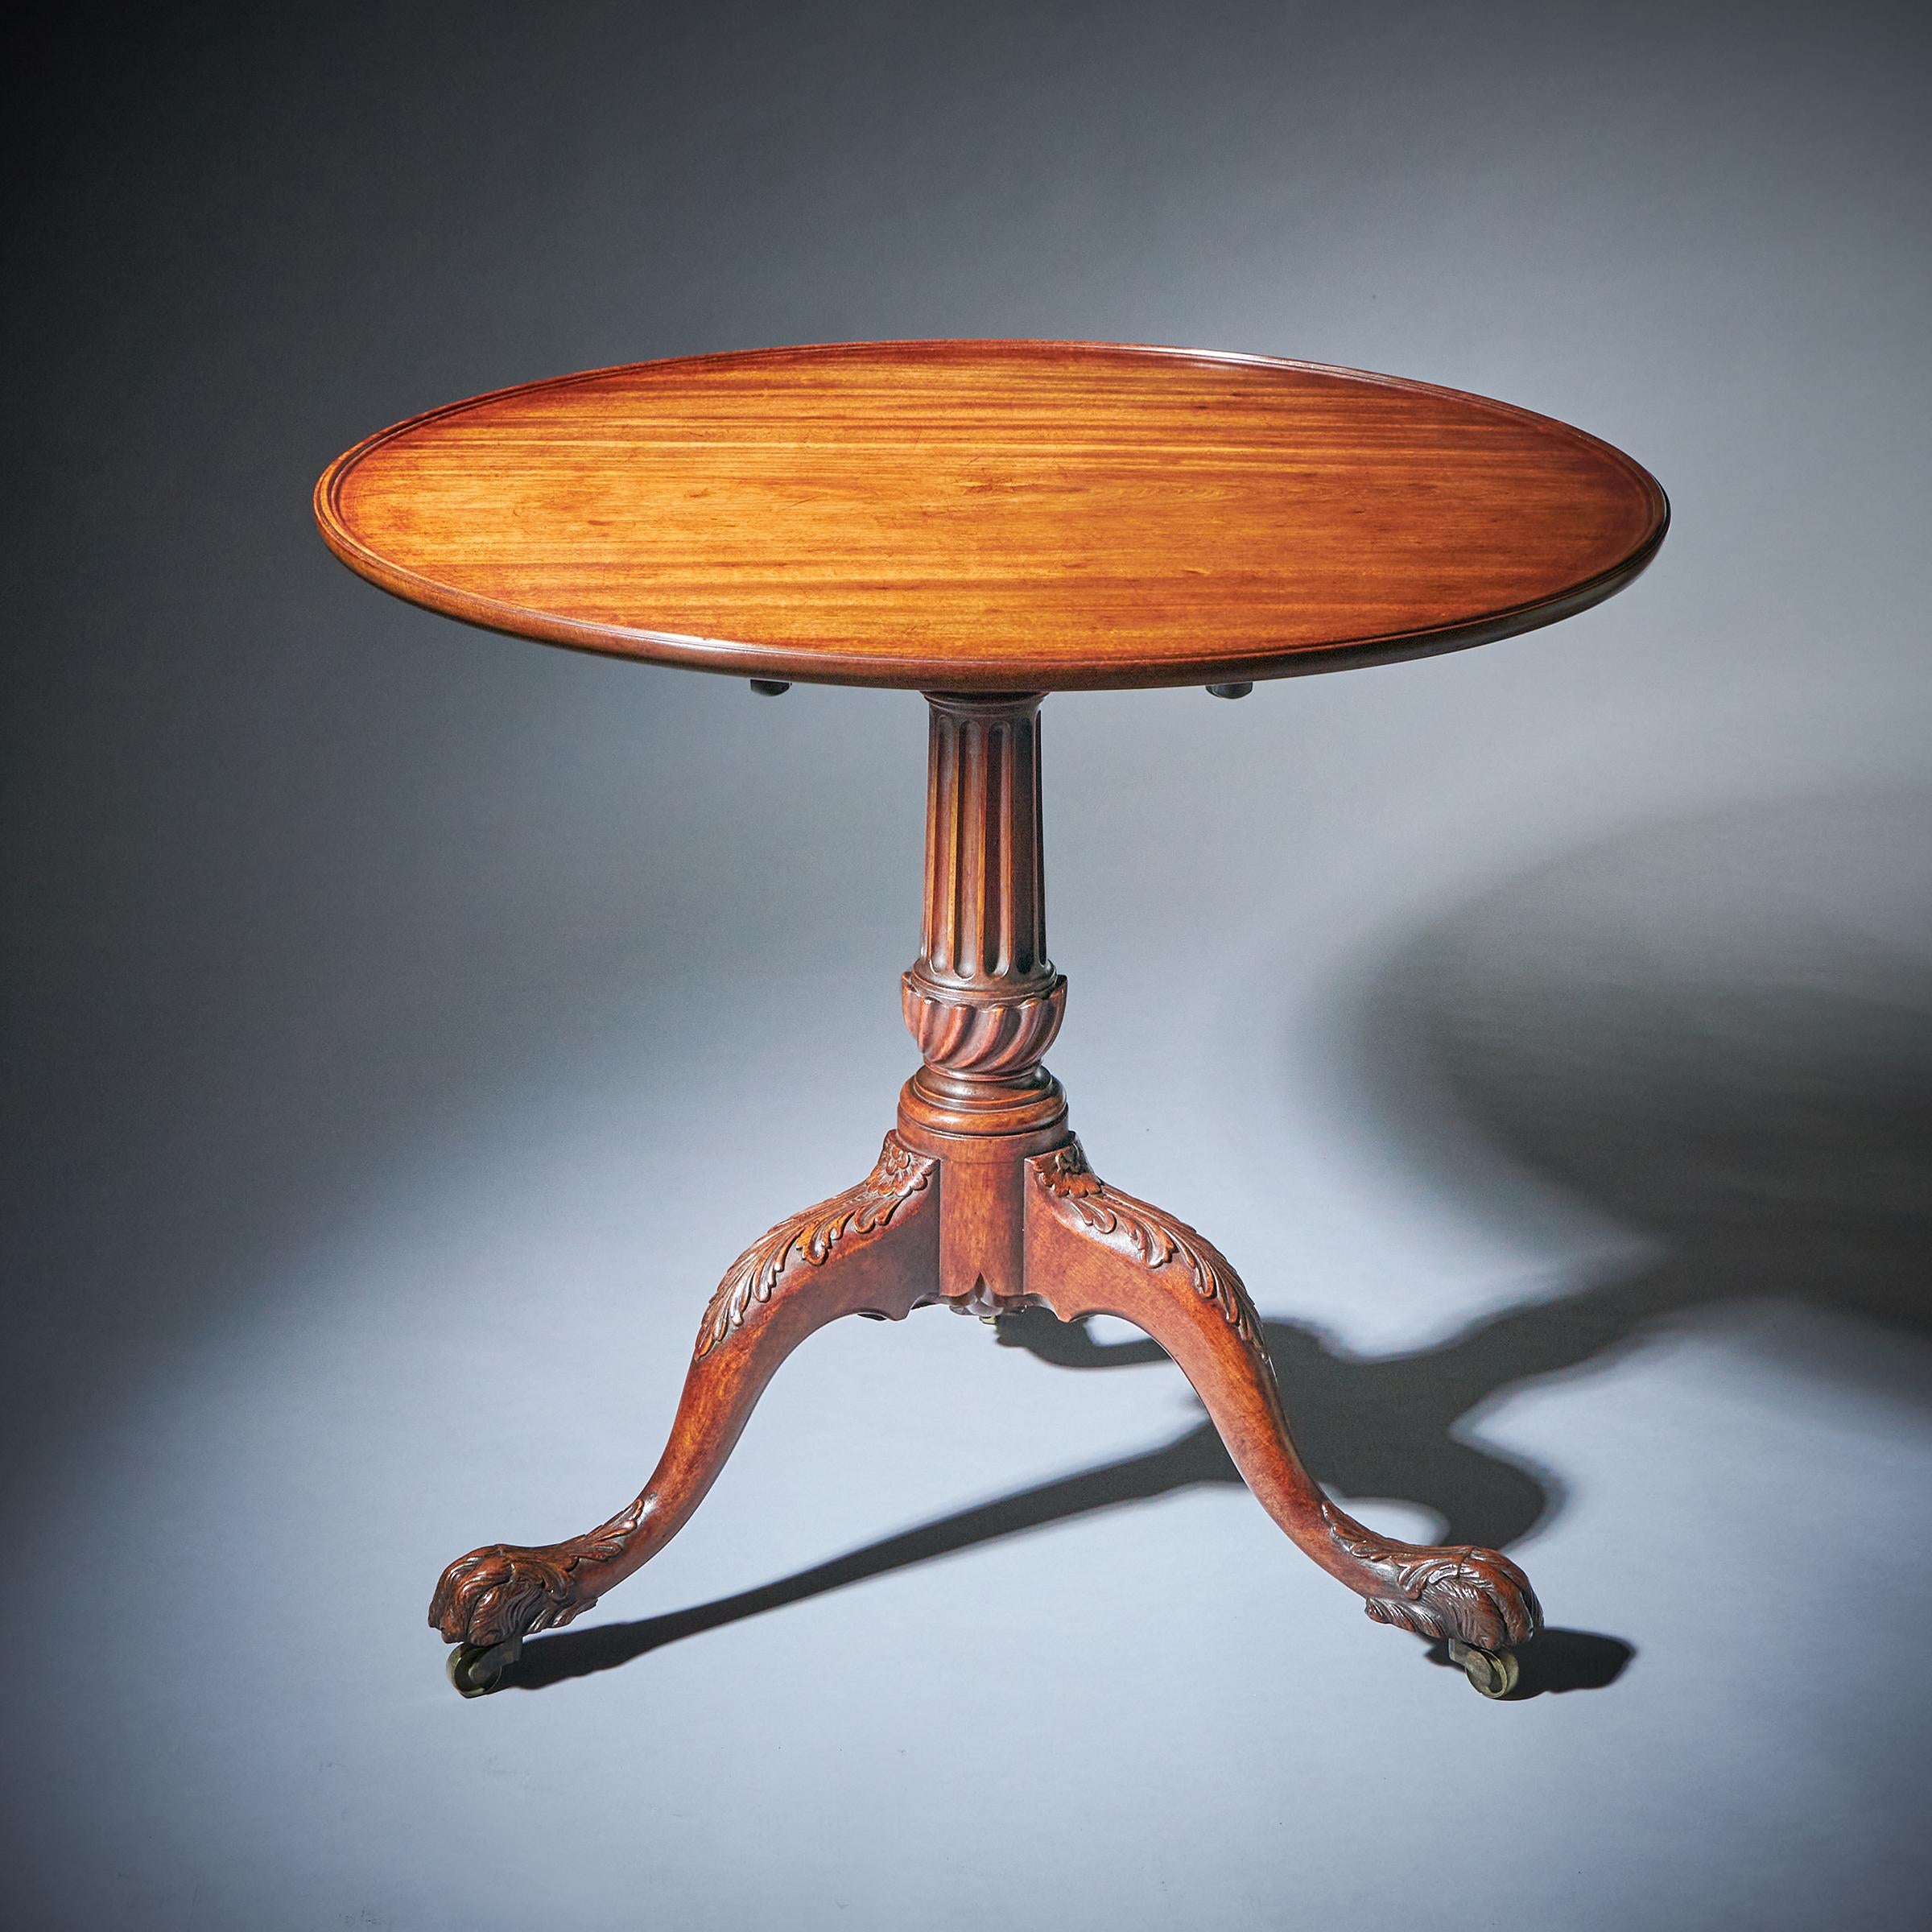 A fine and possibly unique mid-18th-century George III mahogany tray-top tripod table, Circa 1760-1770. Ireland 

The solid one-piece moulded tray top is set with a fine parquetry star inlay over the solid stop-fluted column, leading to a finely